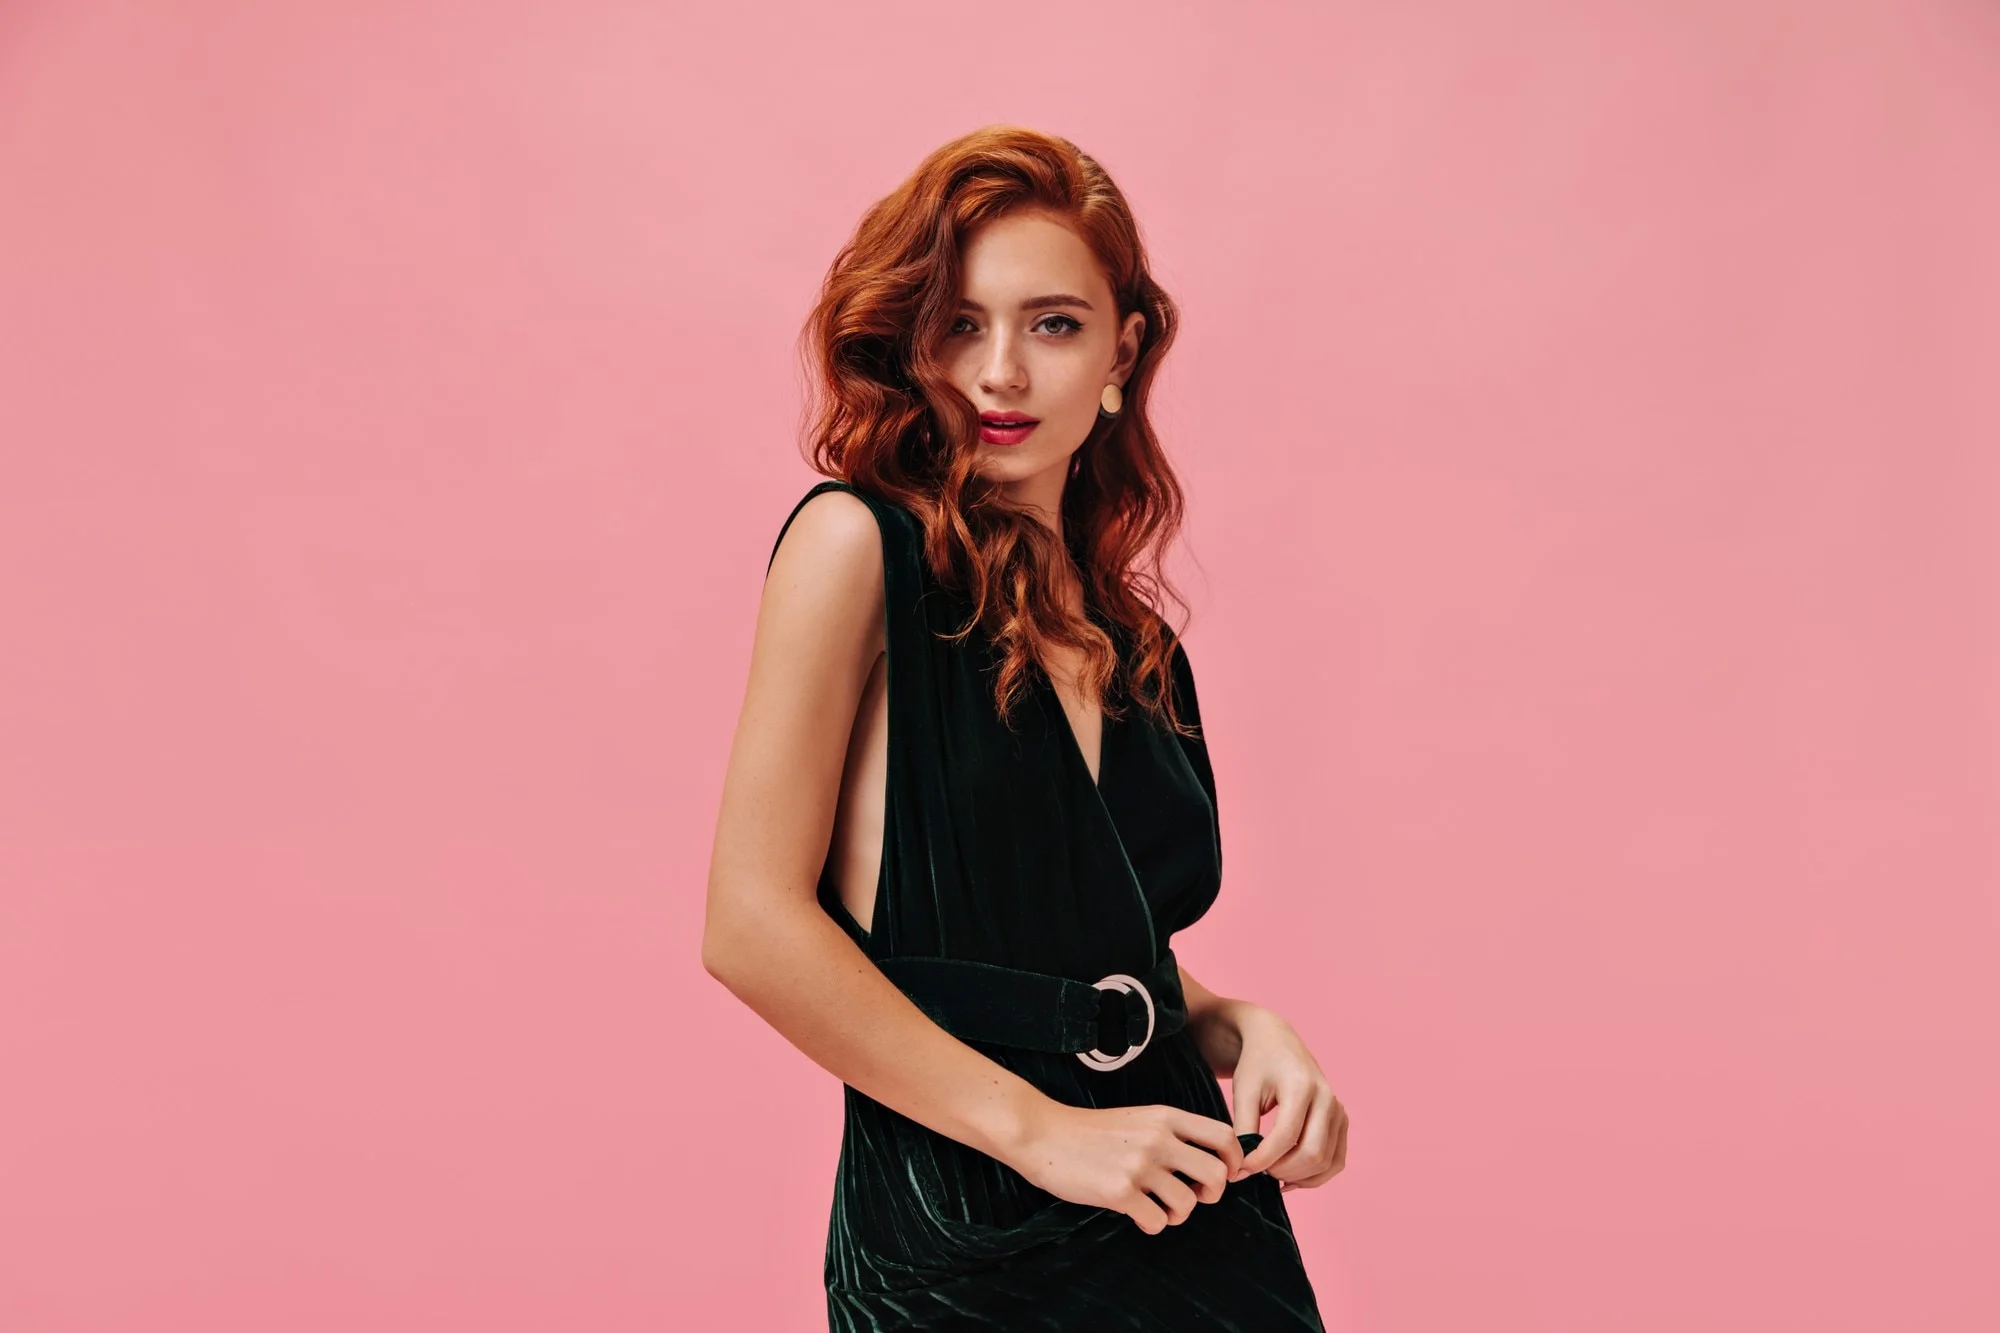 attractive woman dark dress looks front pink wall 197531 23819